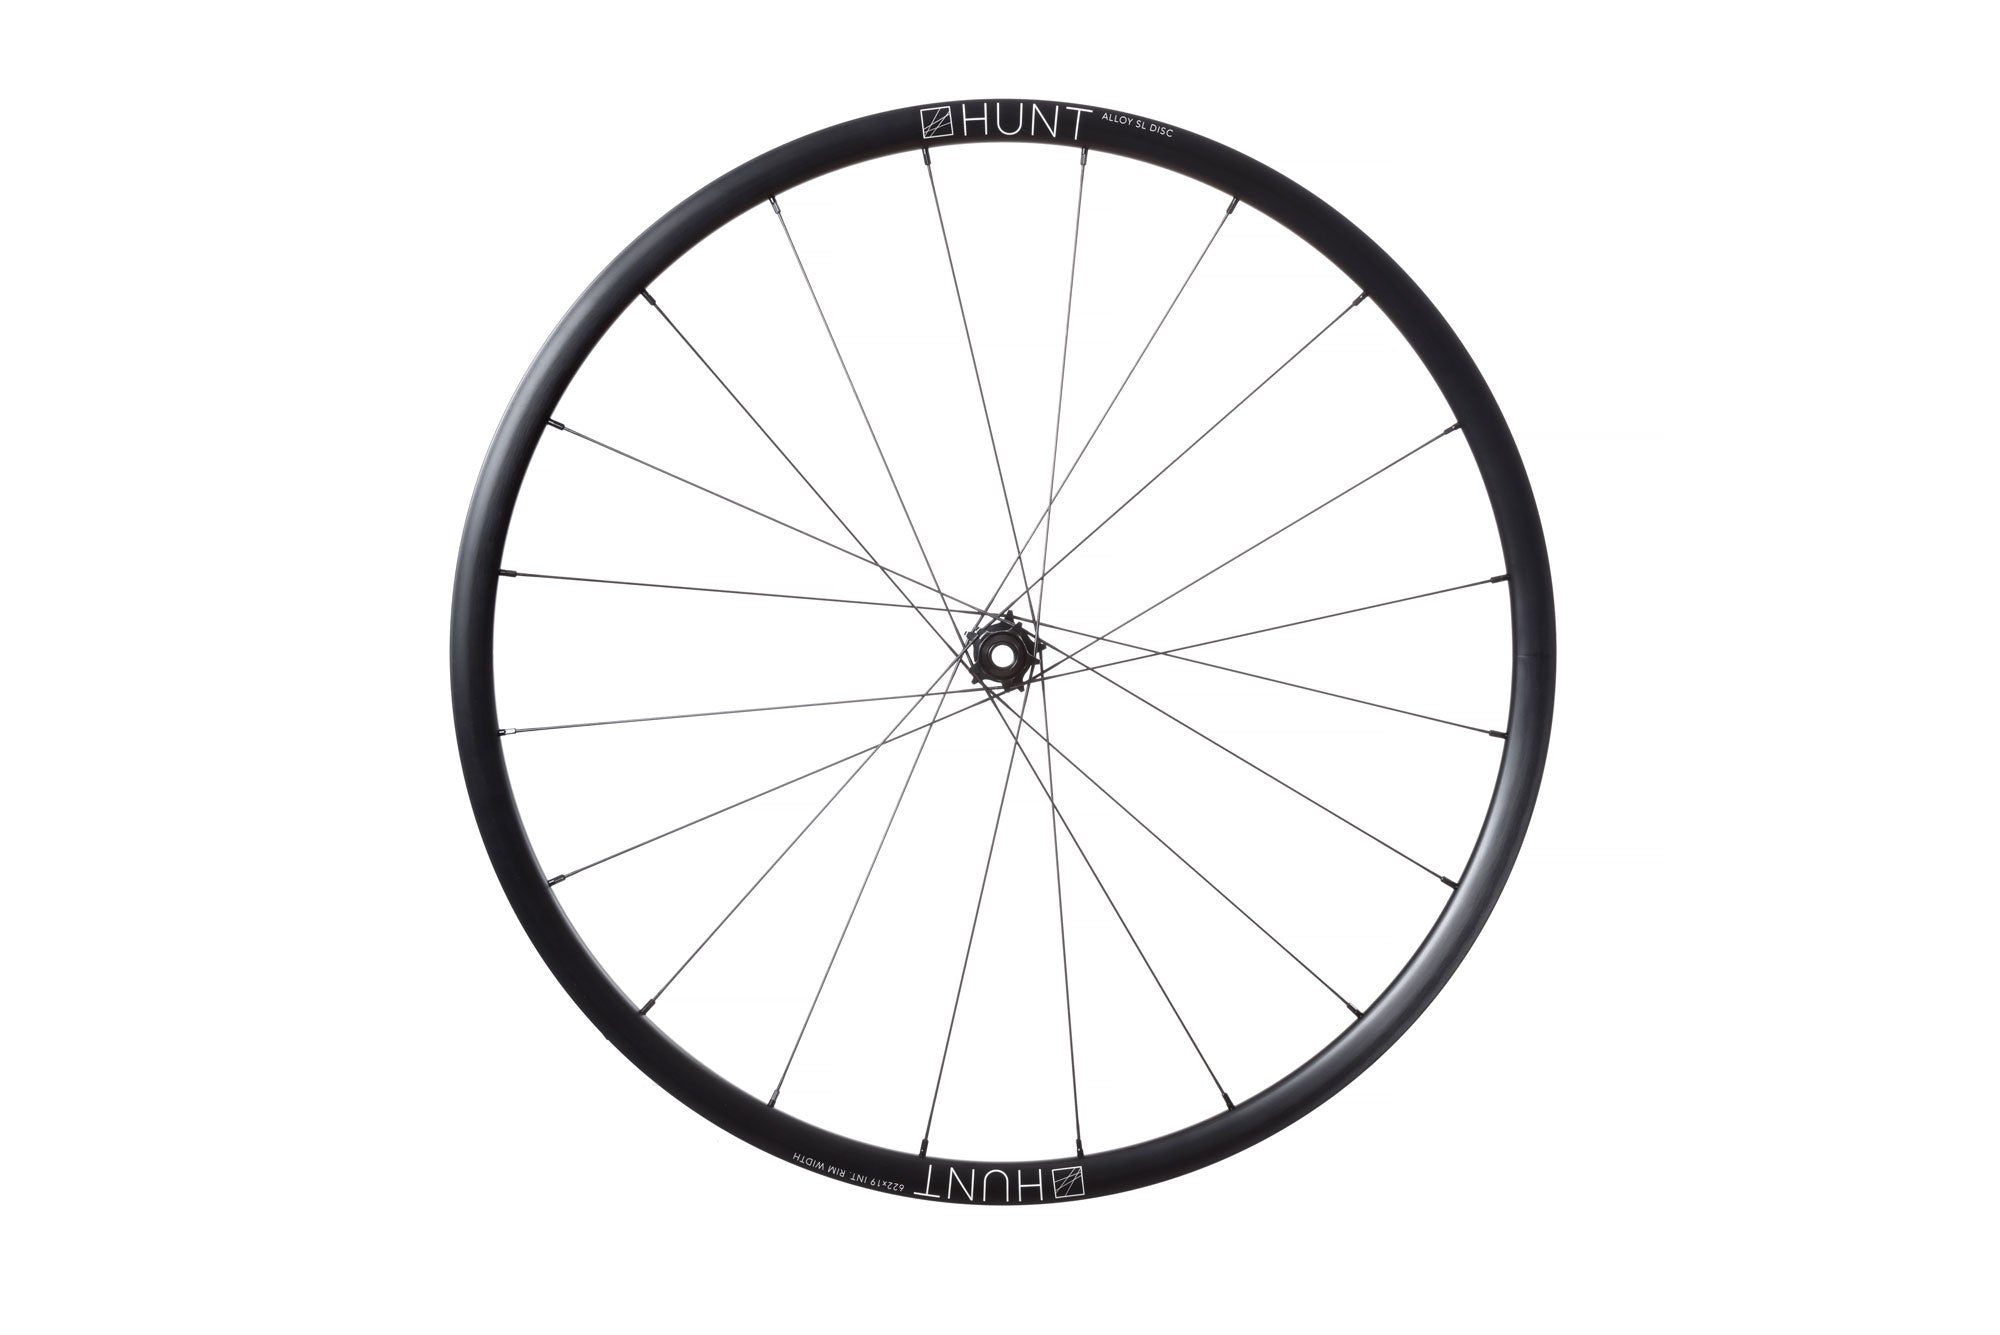 <h1>Rims</h1><i>A strong and lightweight HFR+ (High Fatigue Resistance) heat-treated alloy rim. The rim profile is asymmetric and disc-specific. The rim dimensions are 25mm deep and 24mm wide (19mm internal) optimised for 25-28mm tyres, but working well for anything 23-45mm.</i>